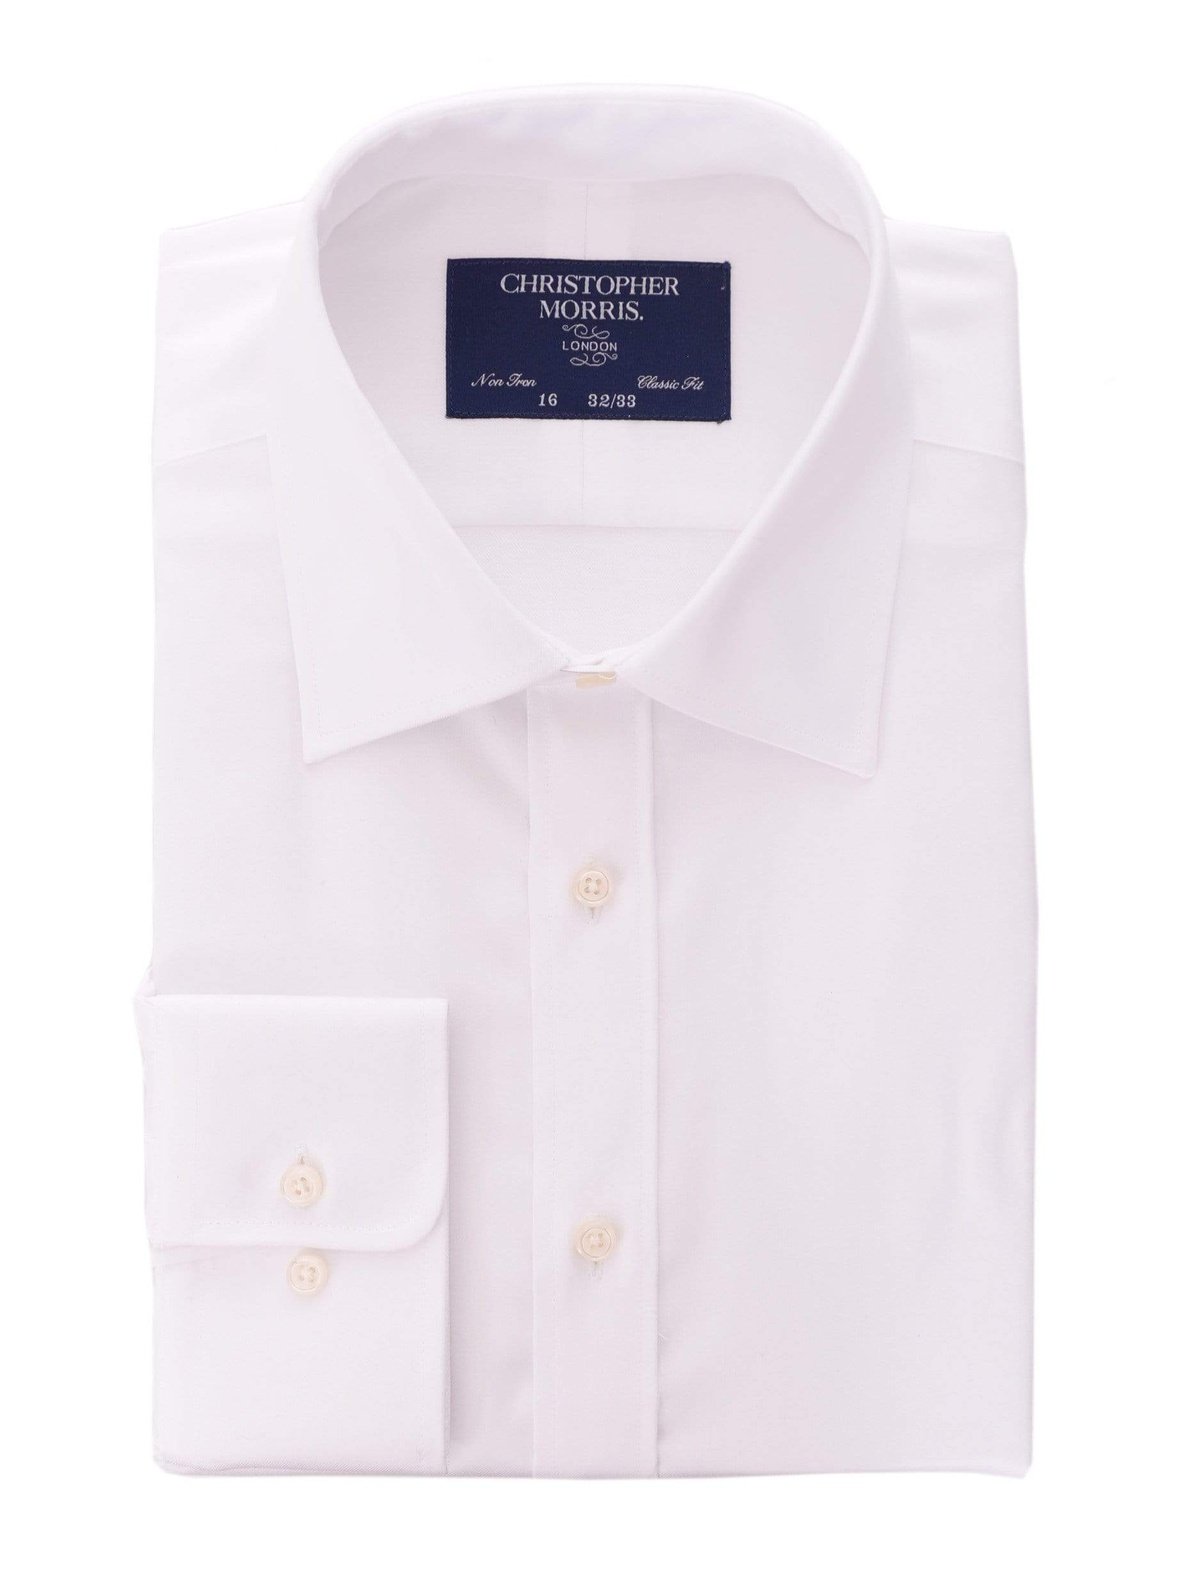 Christopher Morris Bestselling Items 14 1/2 32/33 Christopher Morris Mens 100% Cotton Solid White Non-Iron Classic Fit Dress Shirt